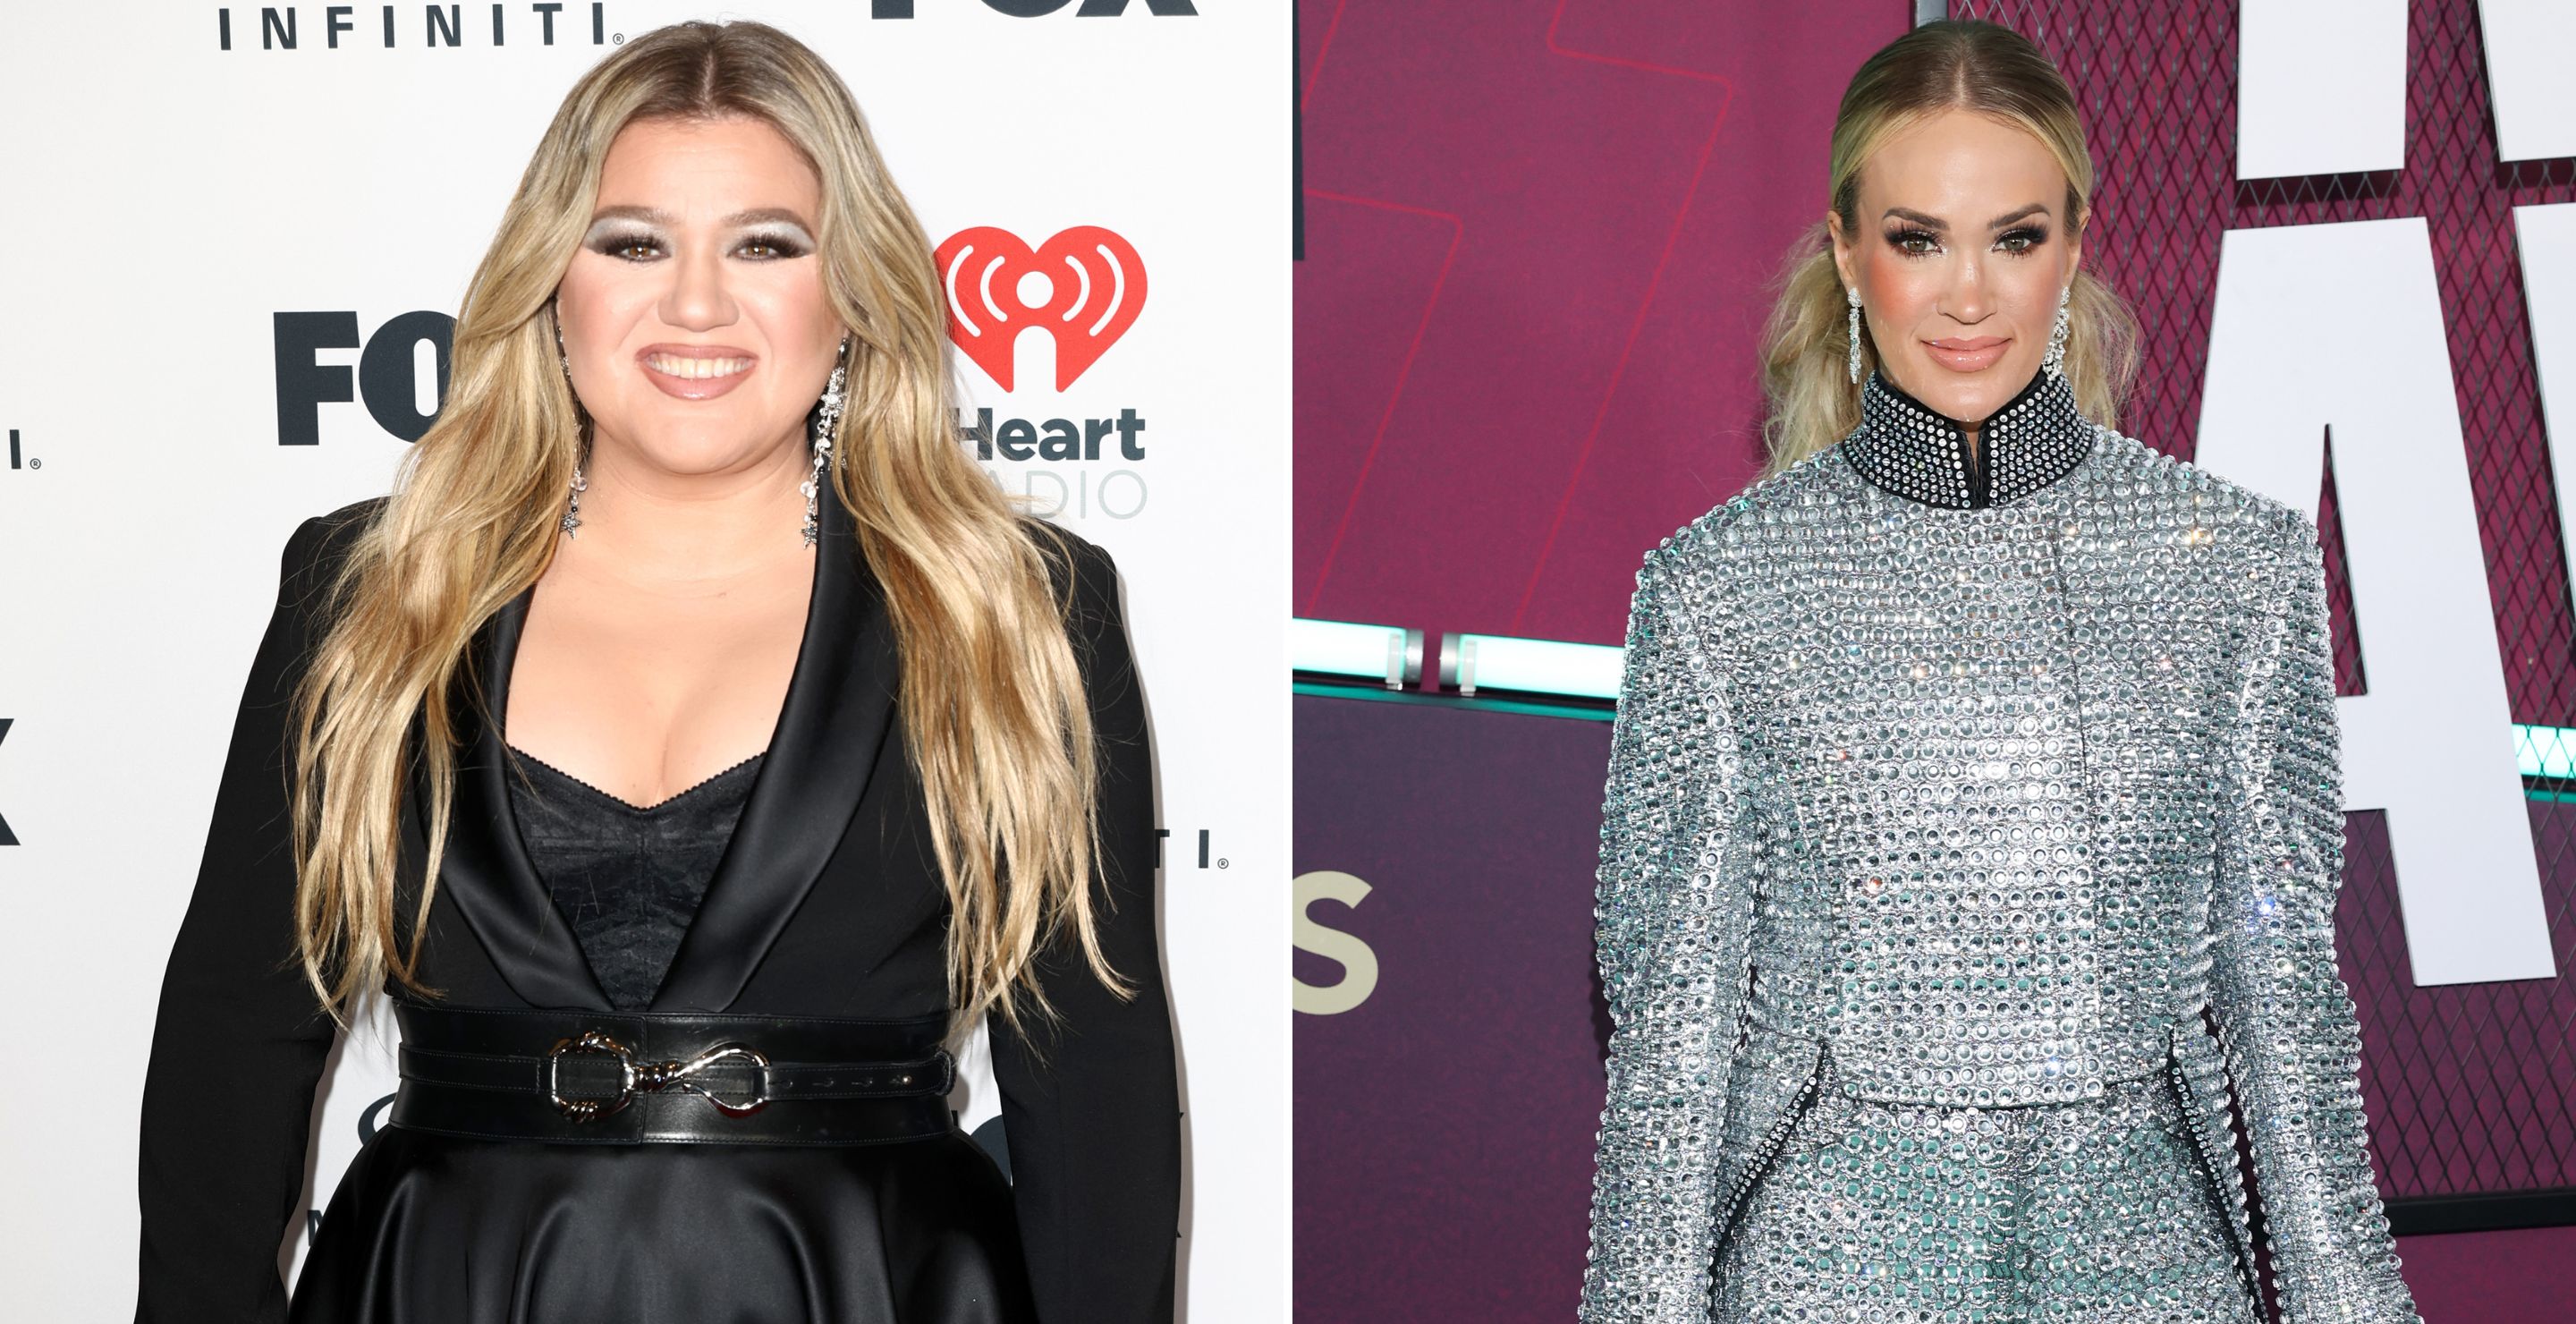 Kelly Clarkson Responds to Carrie Underwood Feud Rumors